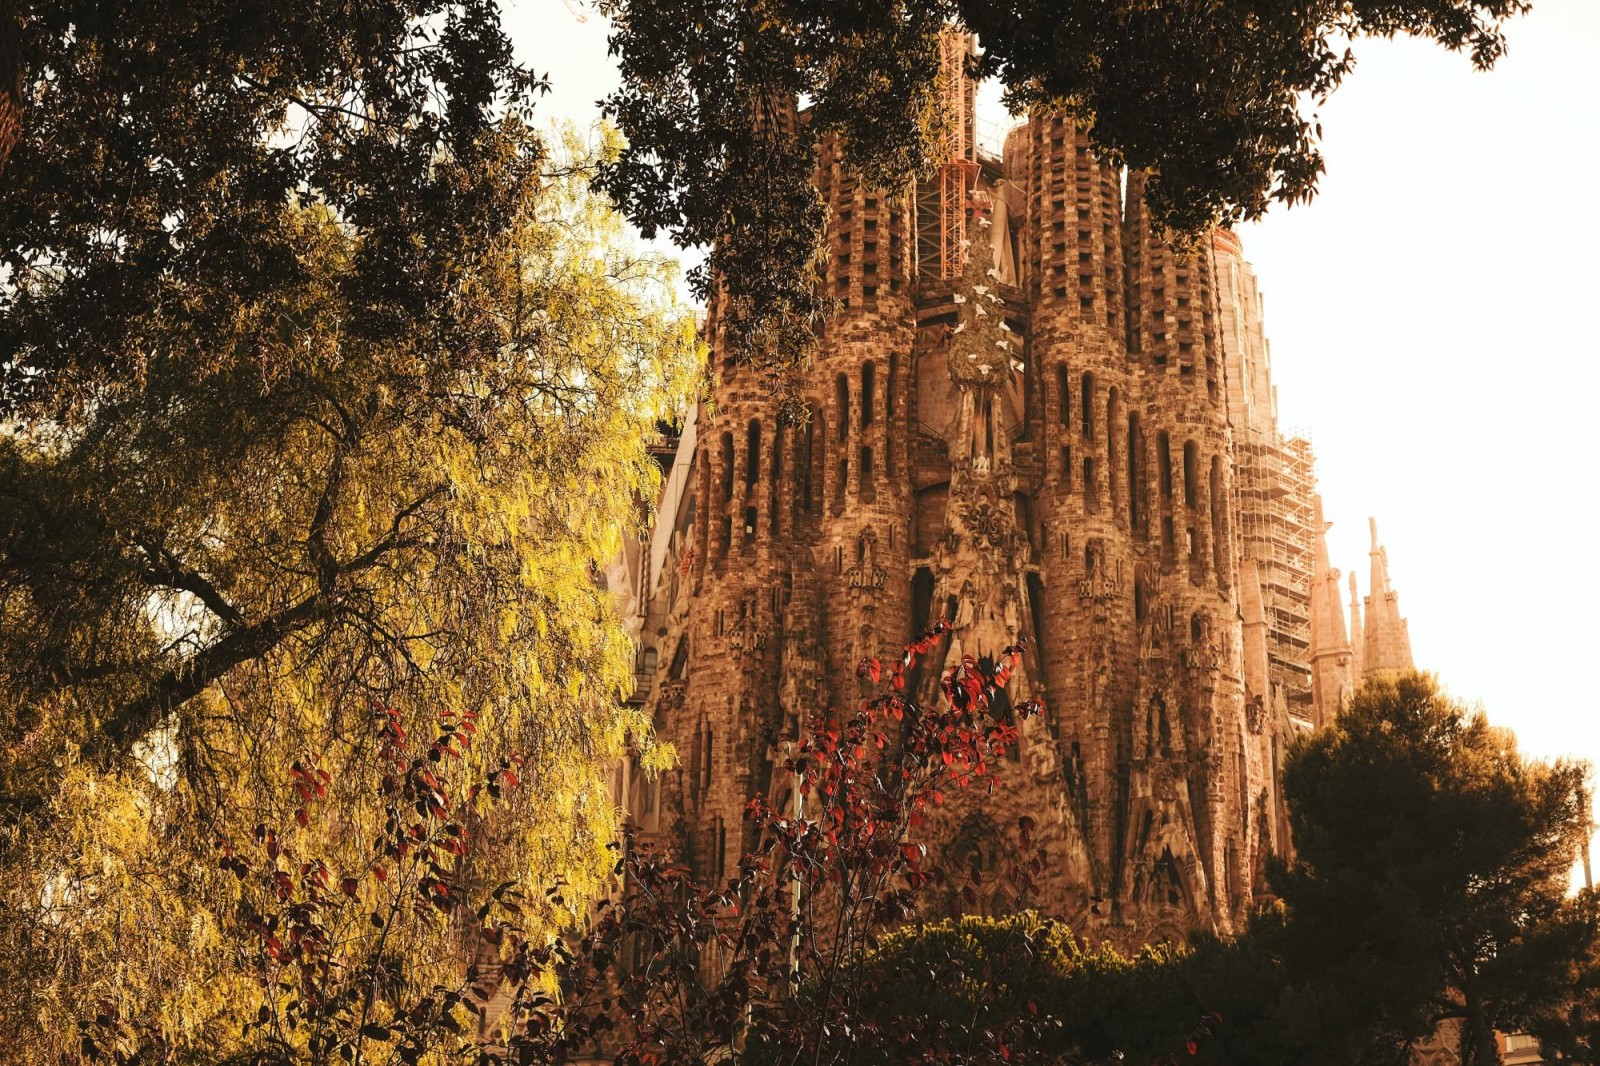 Iconic cathedral of La Sagrada Familia nestled behind green trees in Barcelona. 